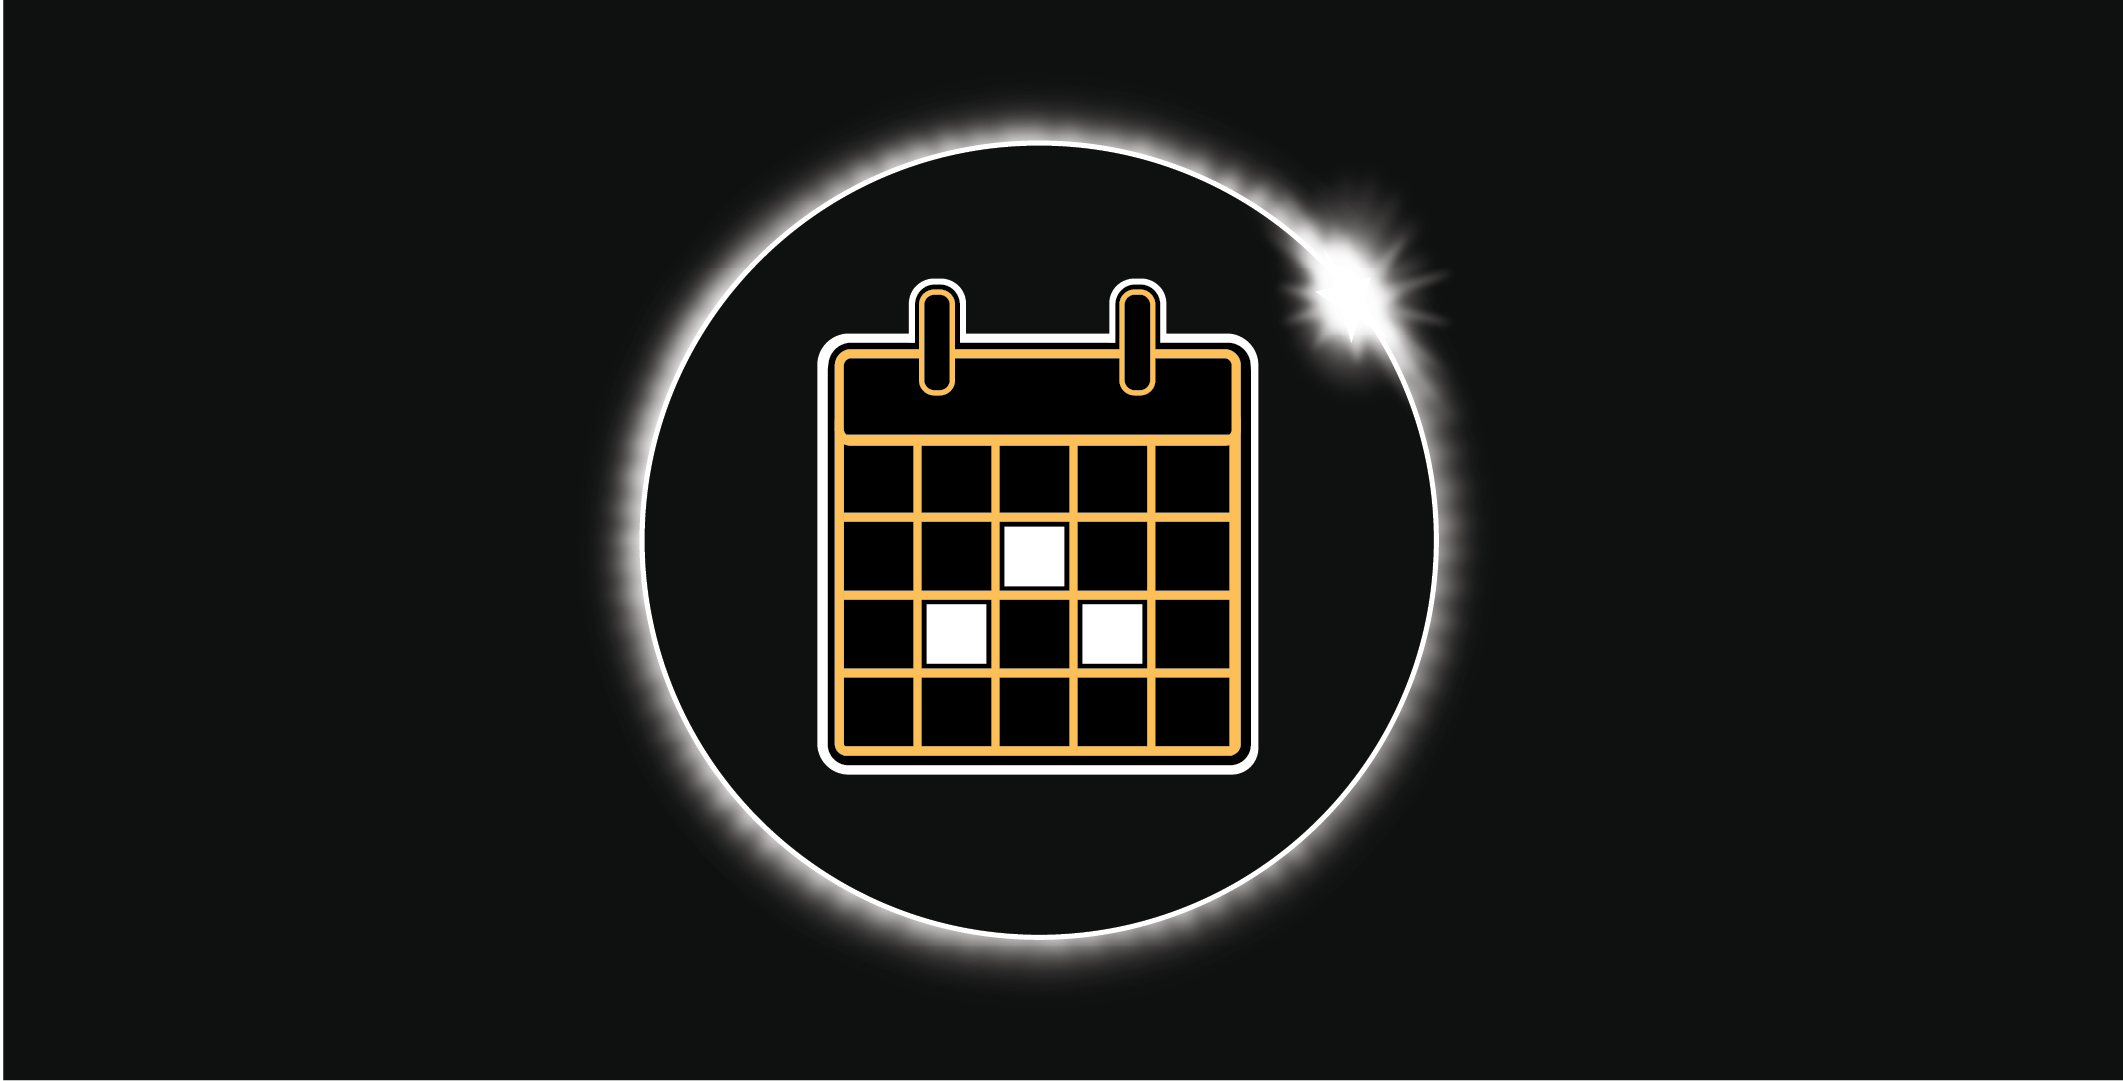 A calendar with a few dates highlighted set against an eclipse graphic.